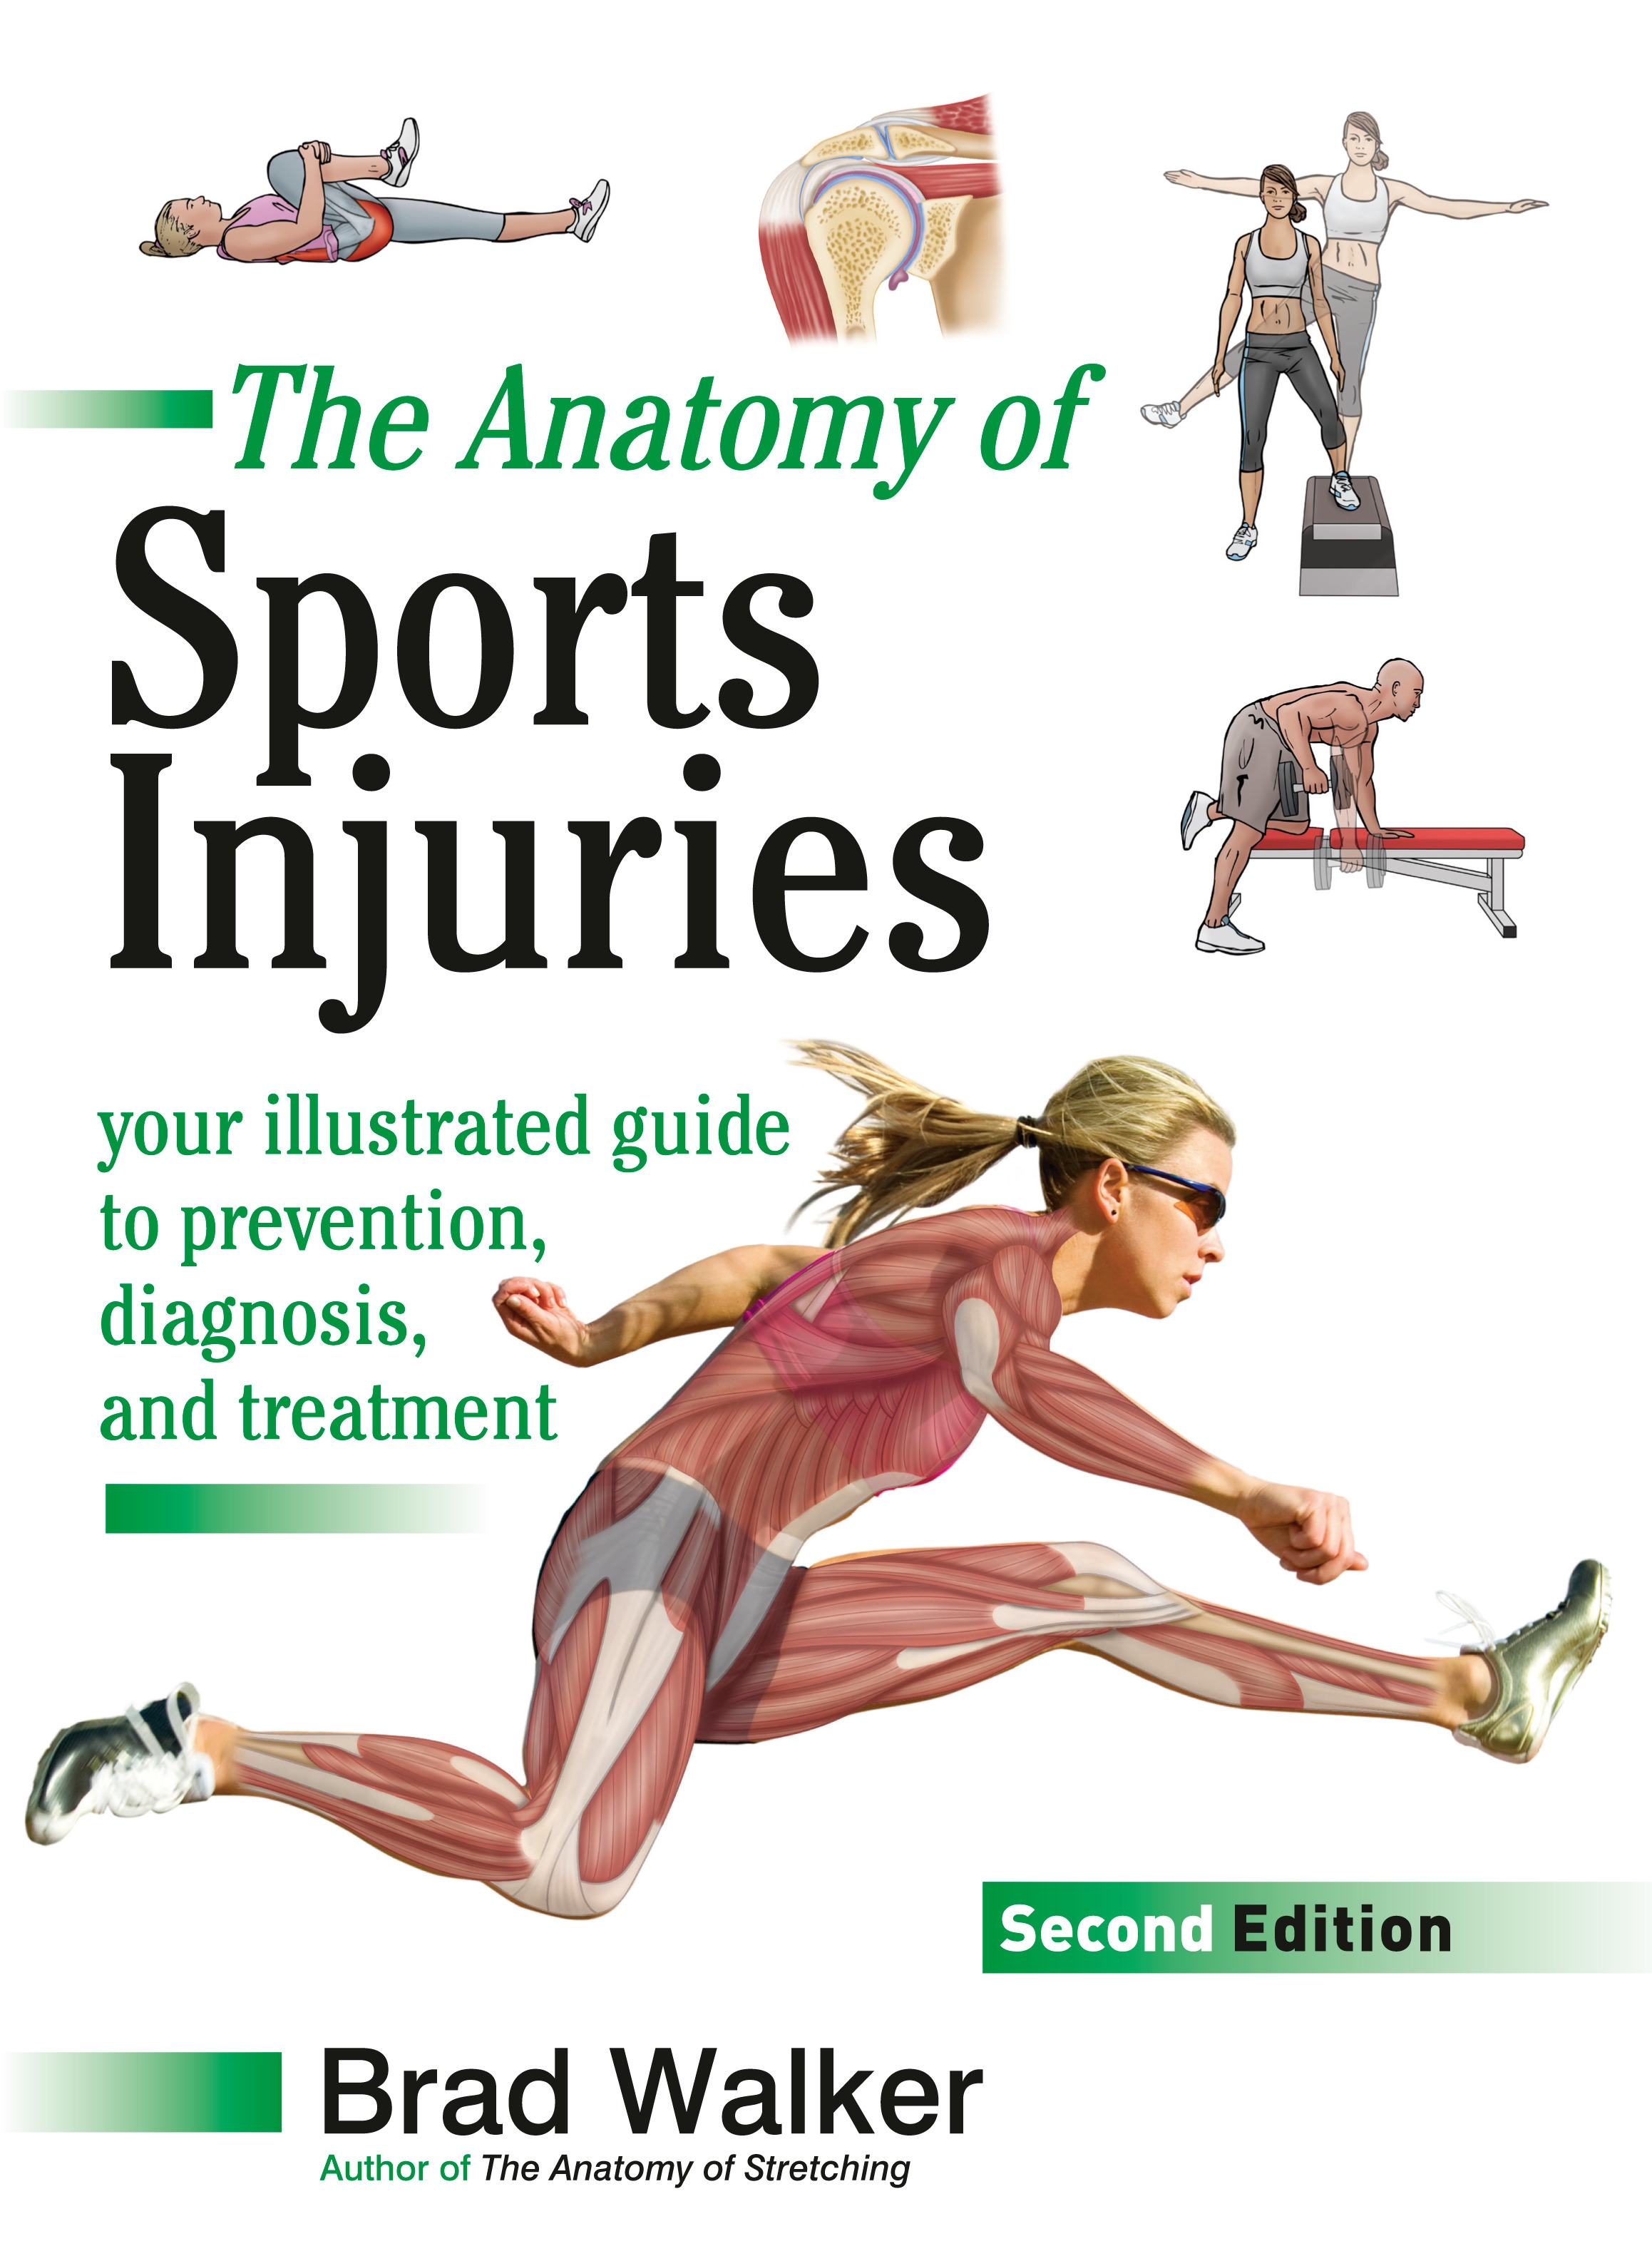 sports injuries research topics